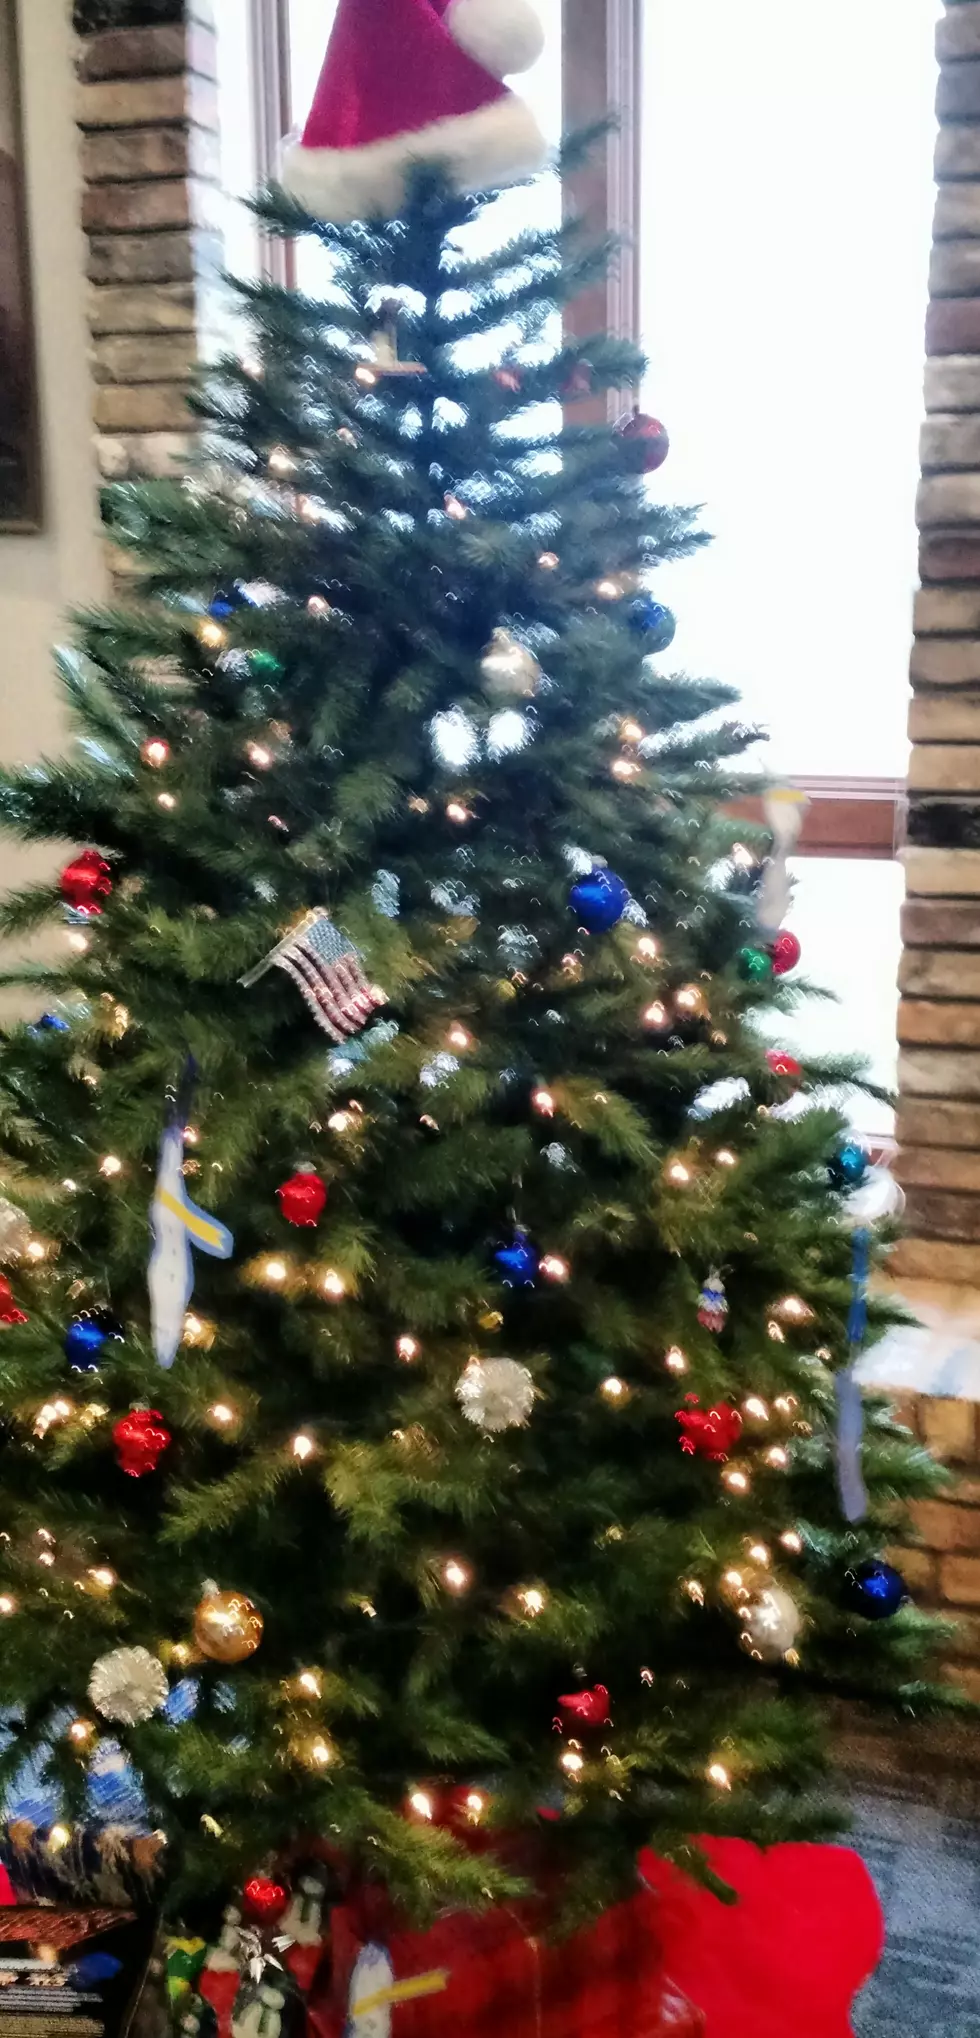 Annual Lighting of the Christmas Tree at Dubuque Library This Weekend